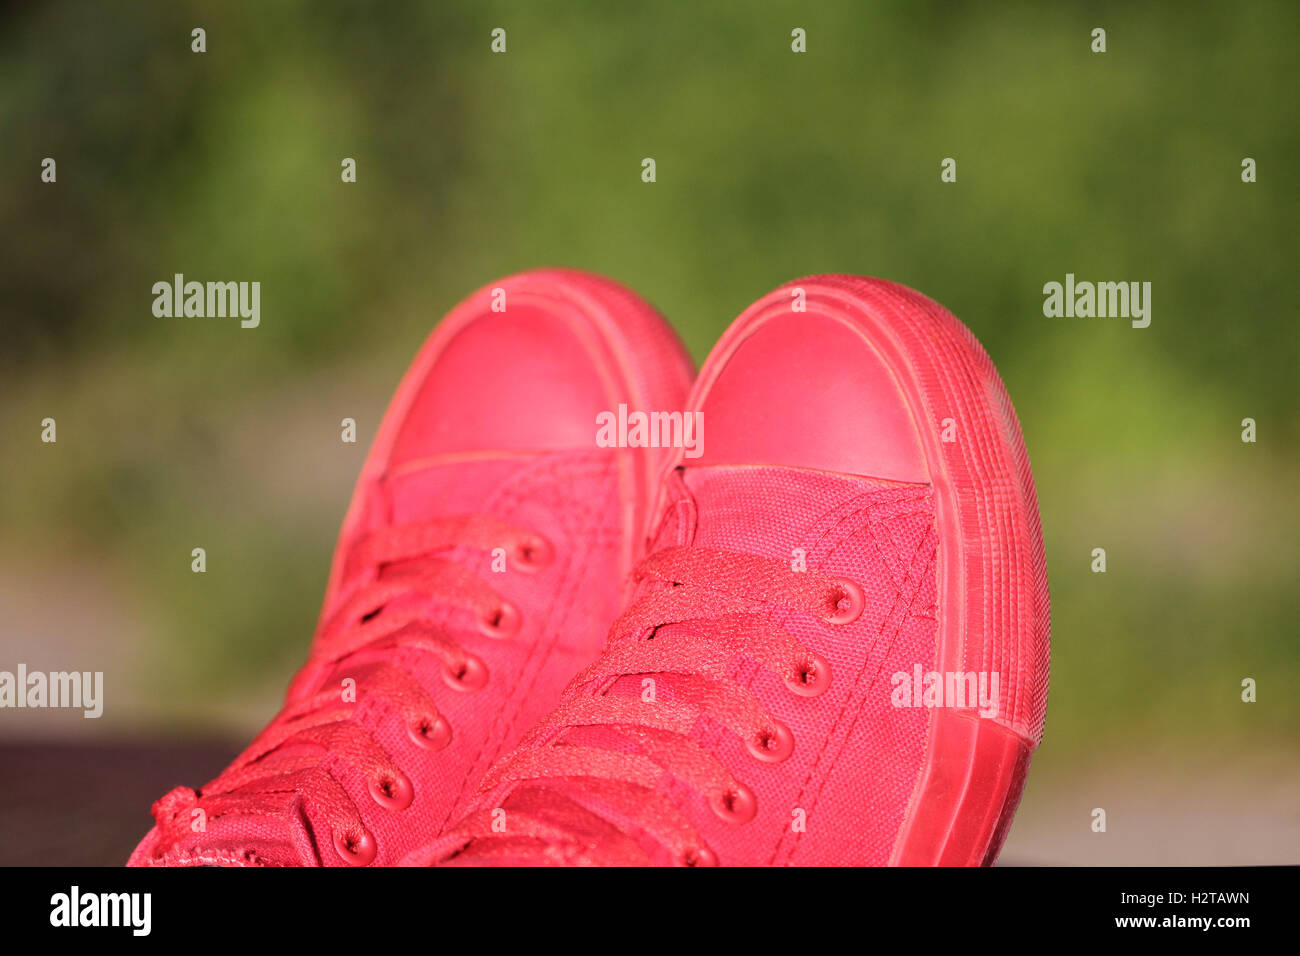 Red sneakers on green blured defocused background Stock Photo